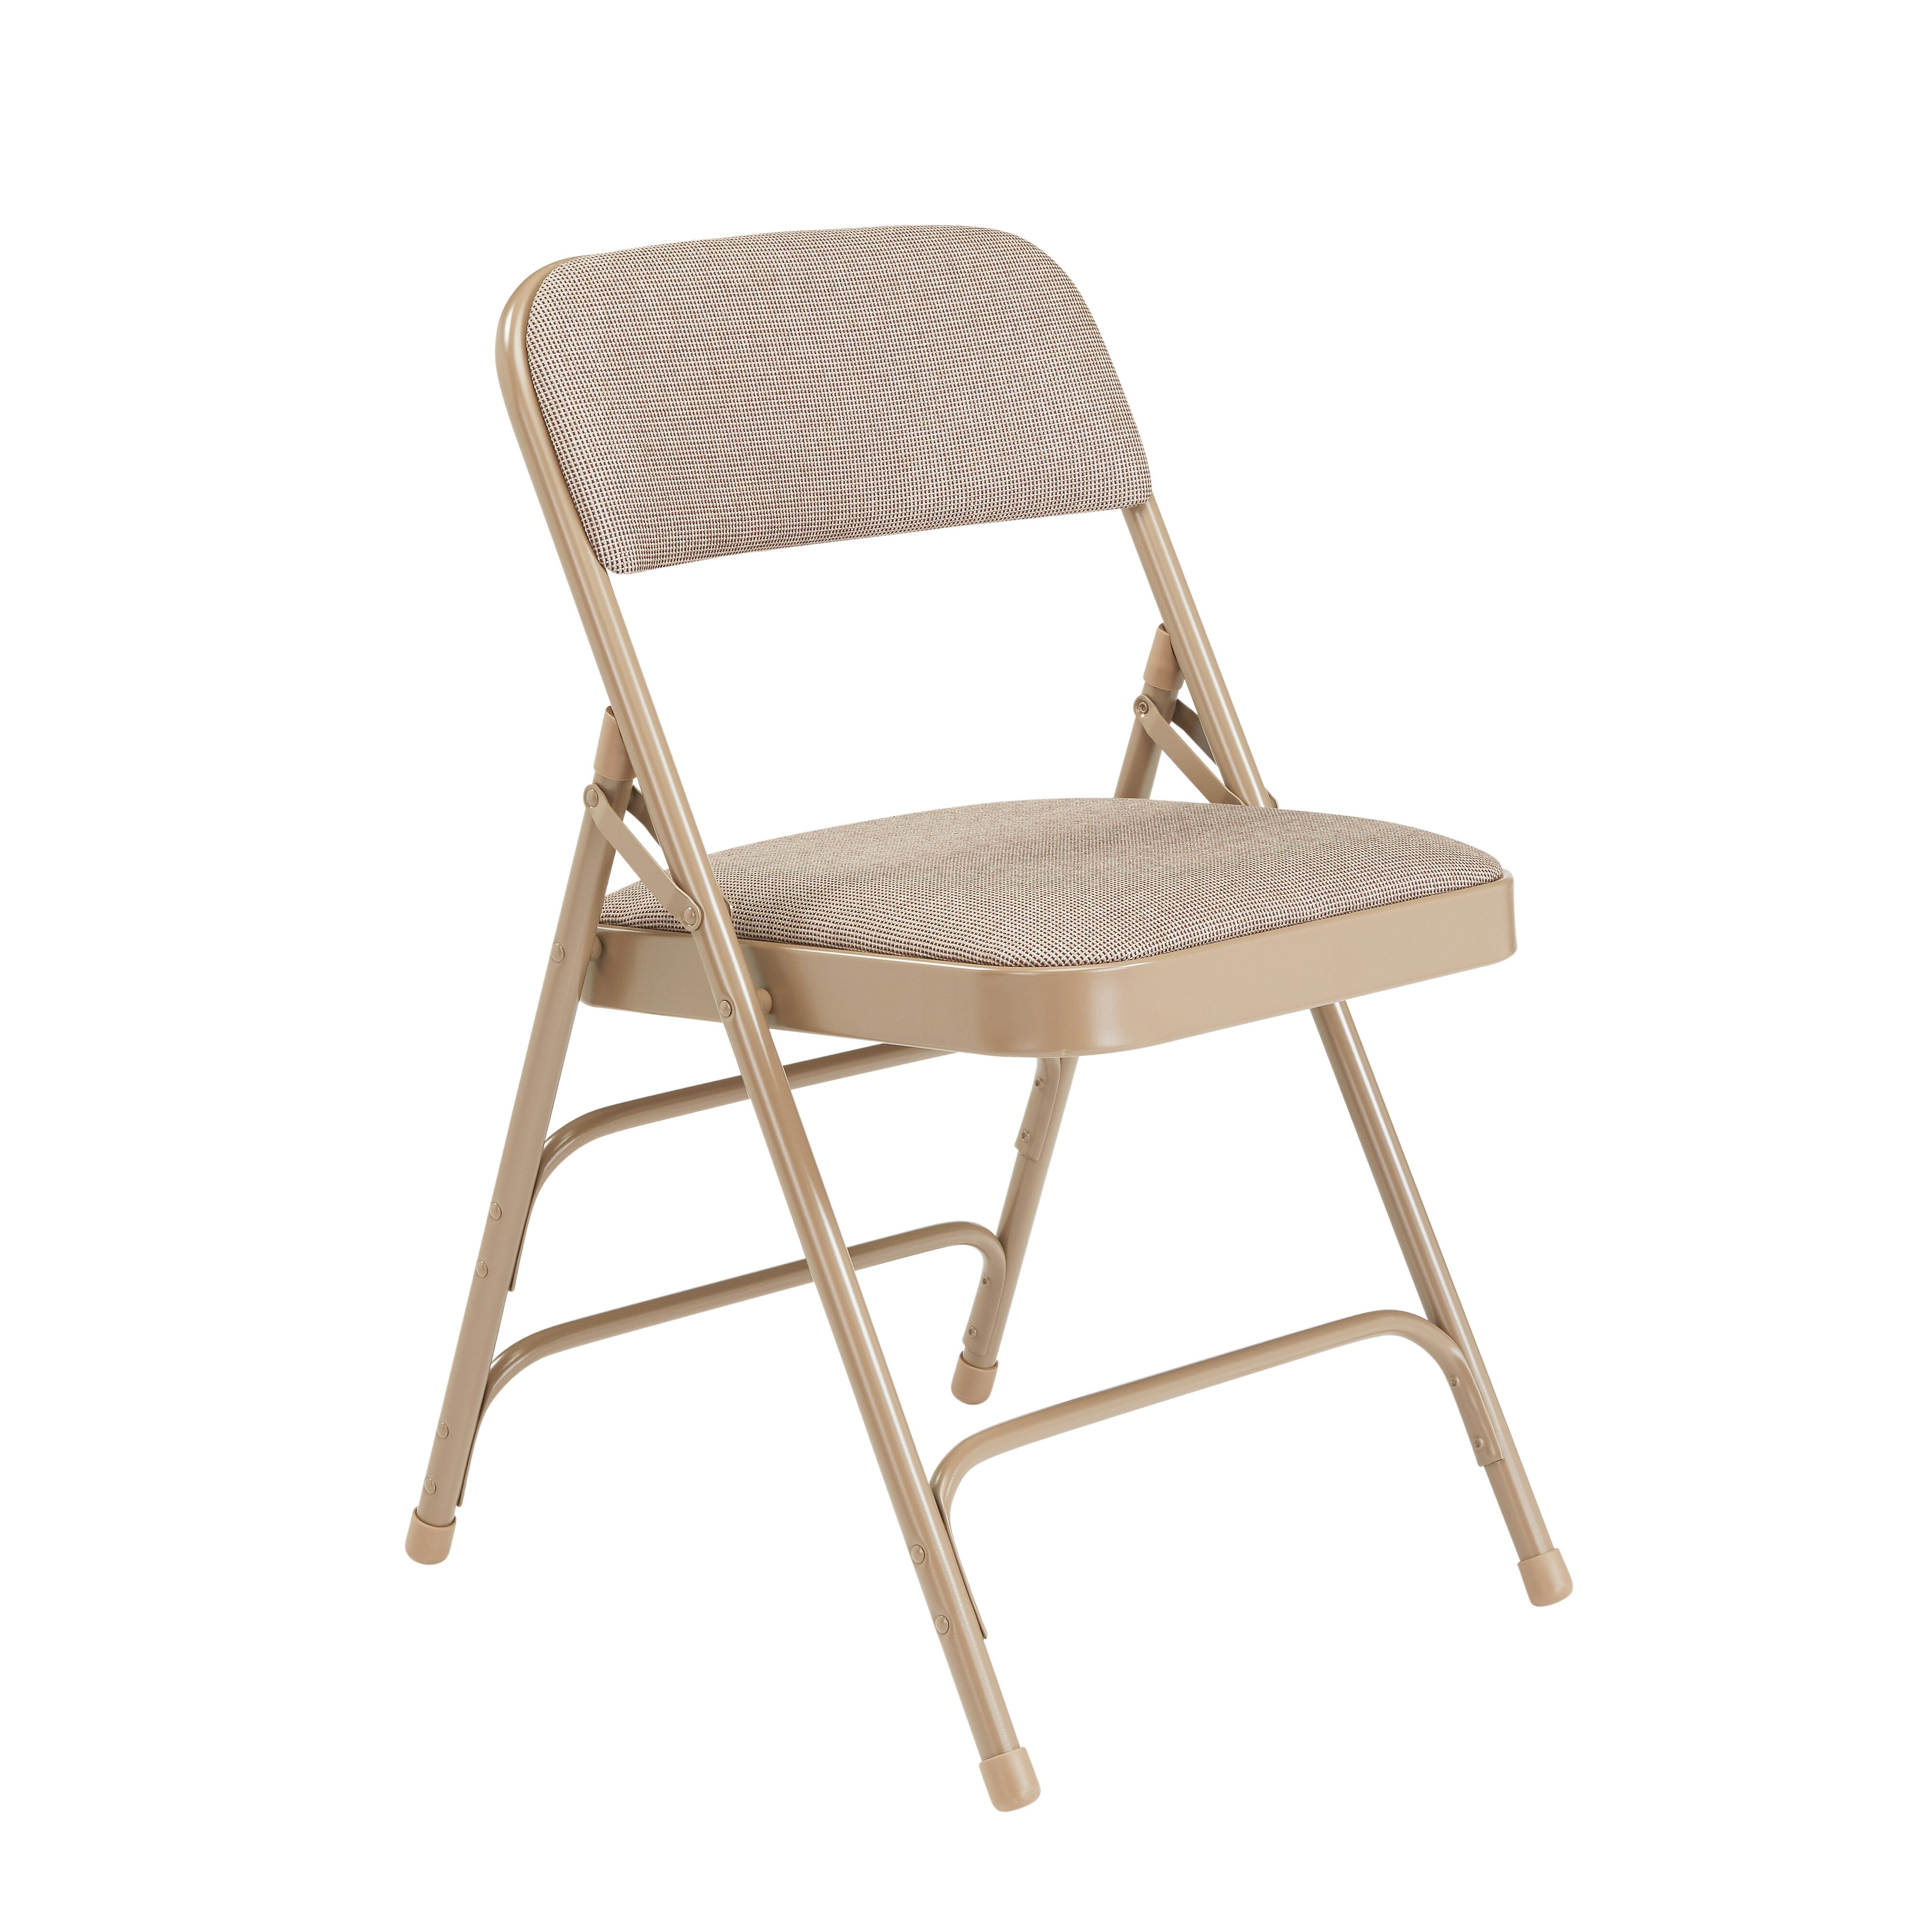 https://ak1.ostkcdn.com/images/products/is/images/direct/4b026704835e298a596449035151e3107e2a3fd2/NPS-Fabric-Upholstered-Premium-Reinforced-Folding-Chairs-%28Pack-of-4%29.jpg